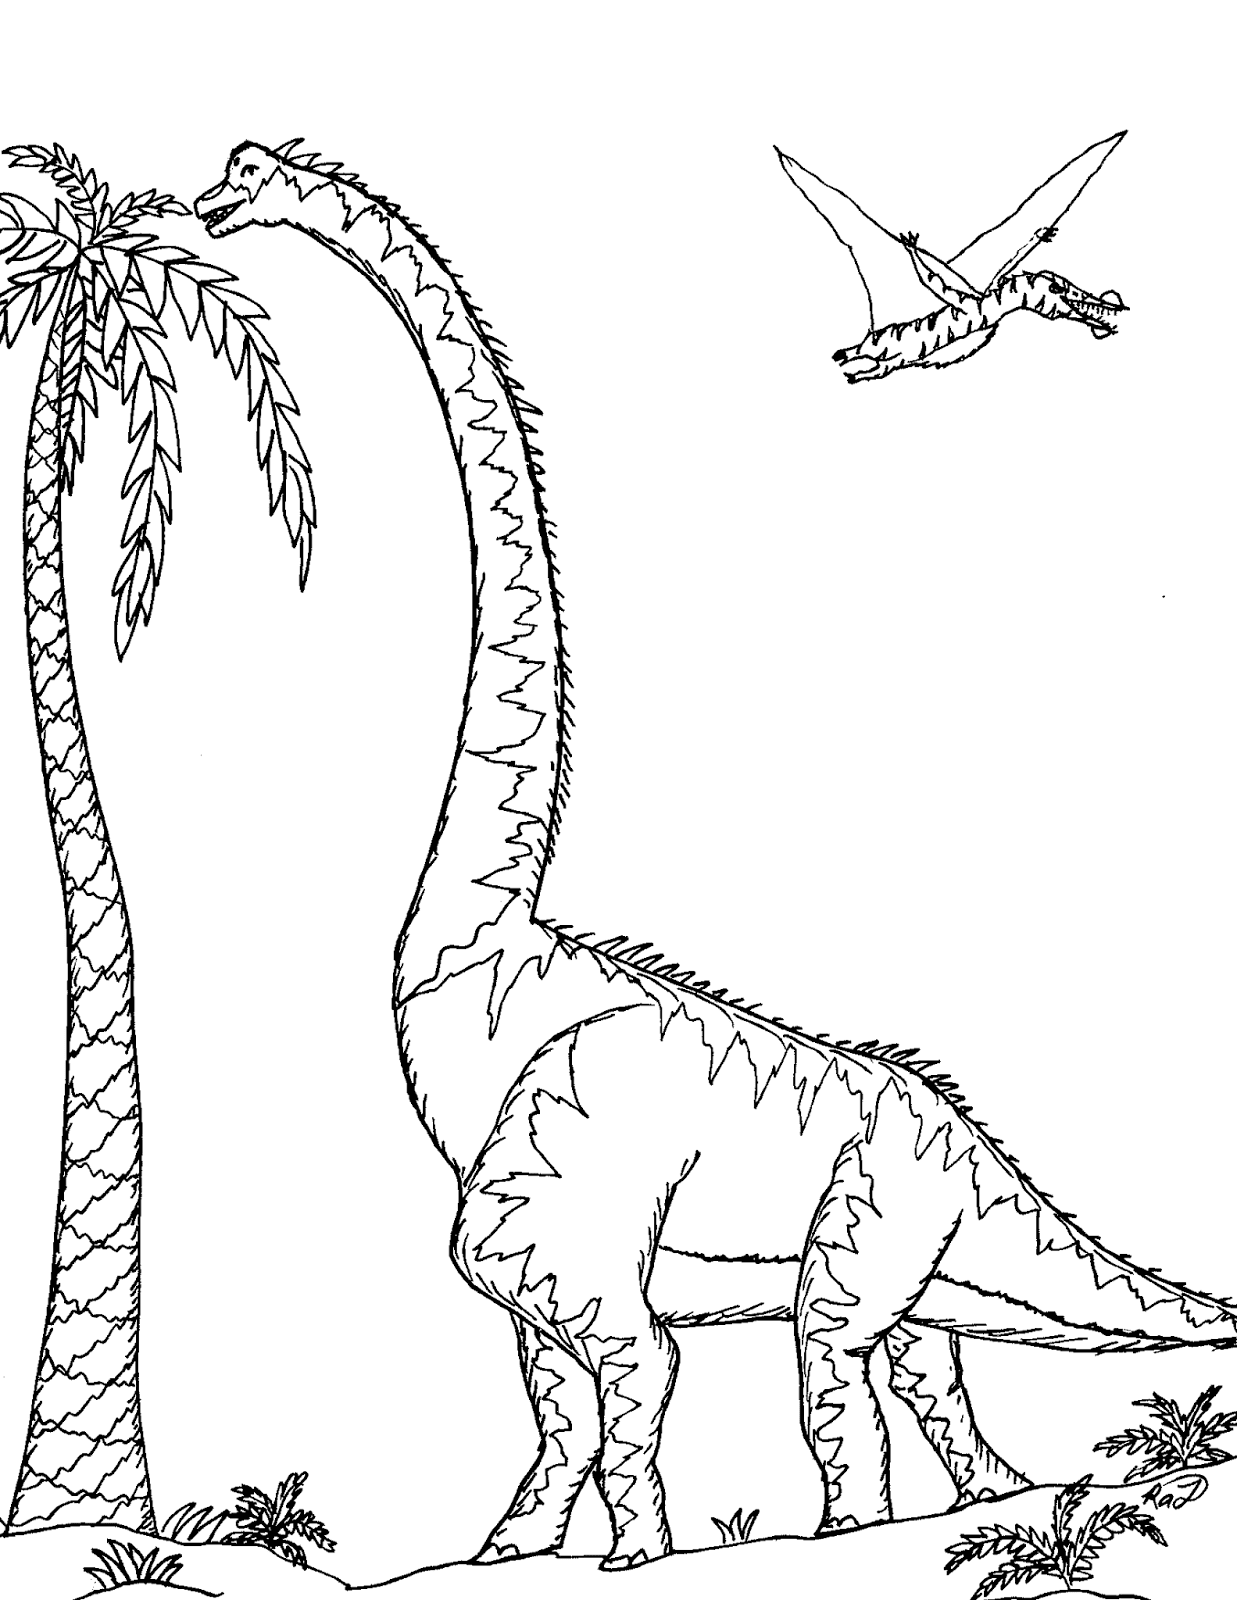 Download Robin's Great Coloring Pages: Biggest Dinosaurs, The Sauropods